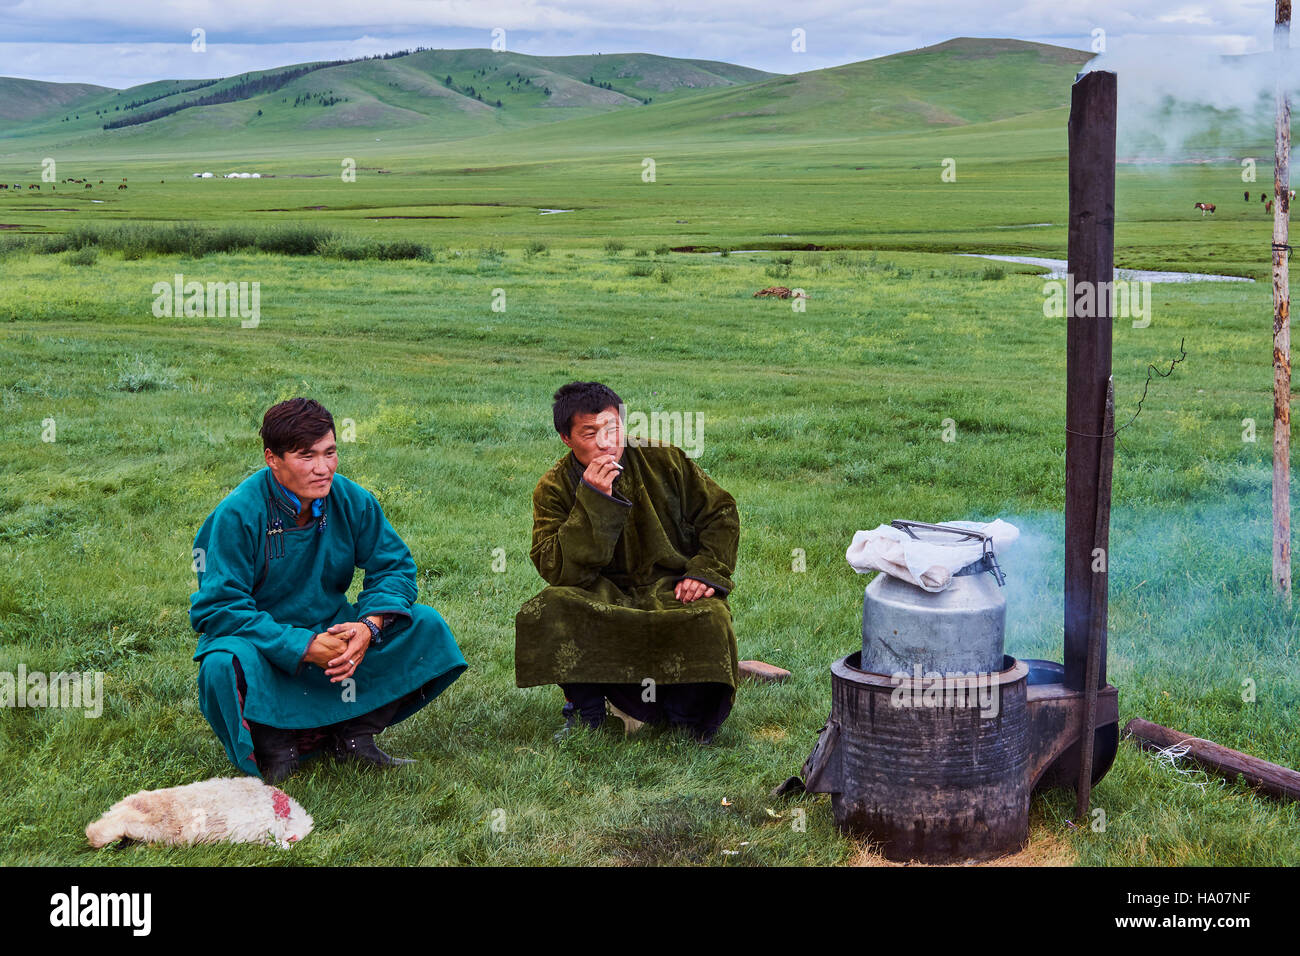 Mongolia, Arkhangai province, yurt nomad camp in the steppe, mongolian barbecue cooking Stock Photo